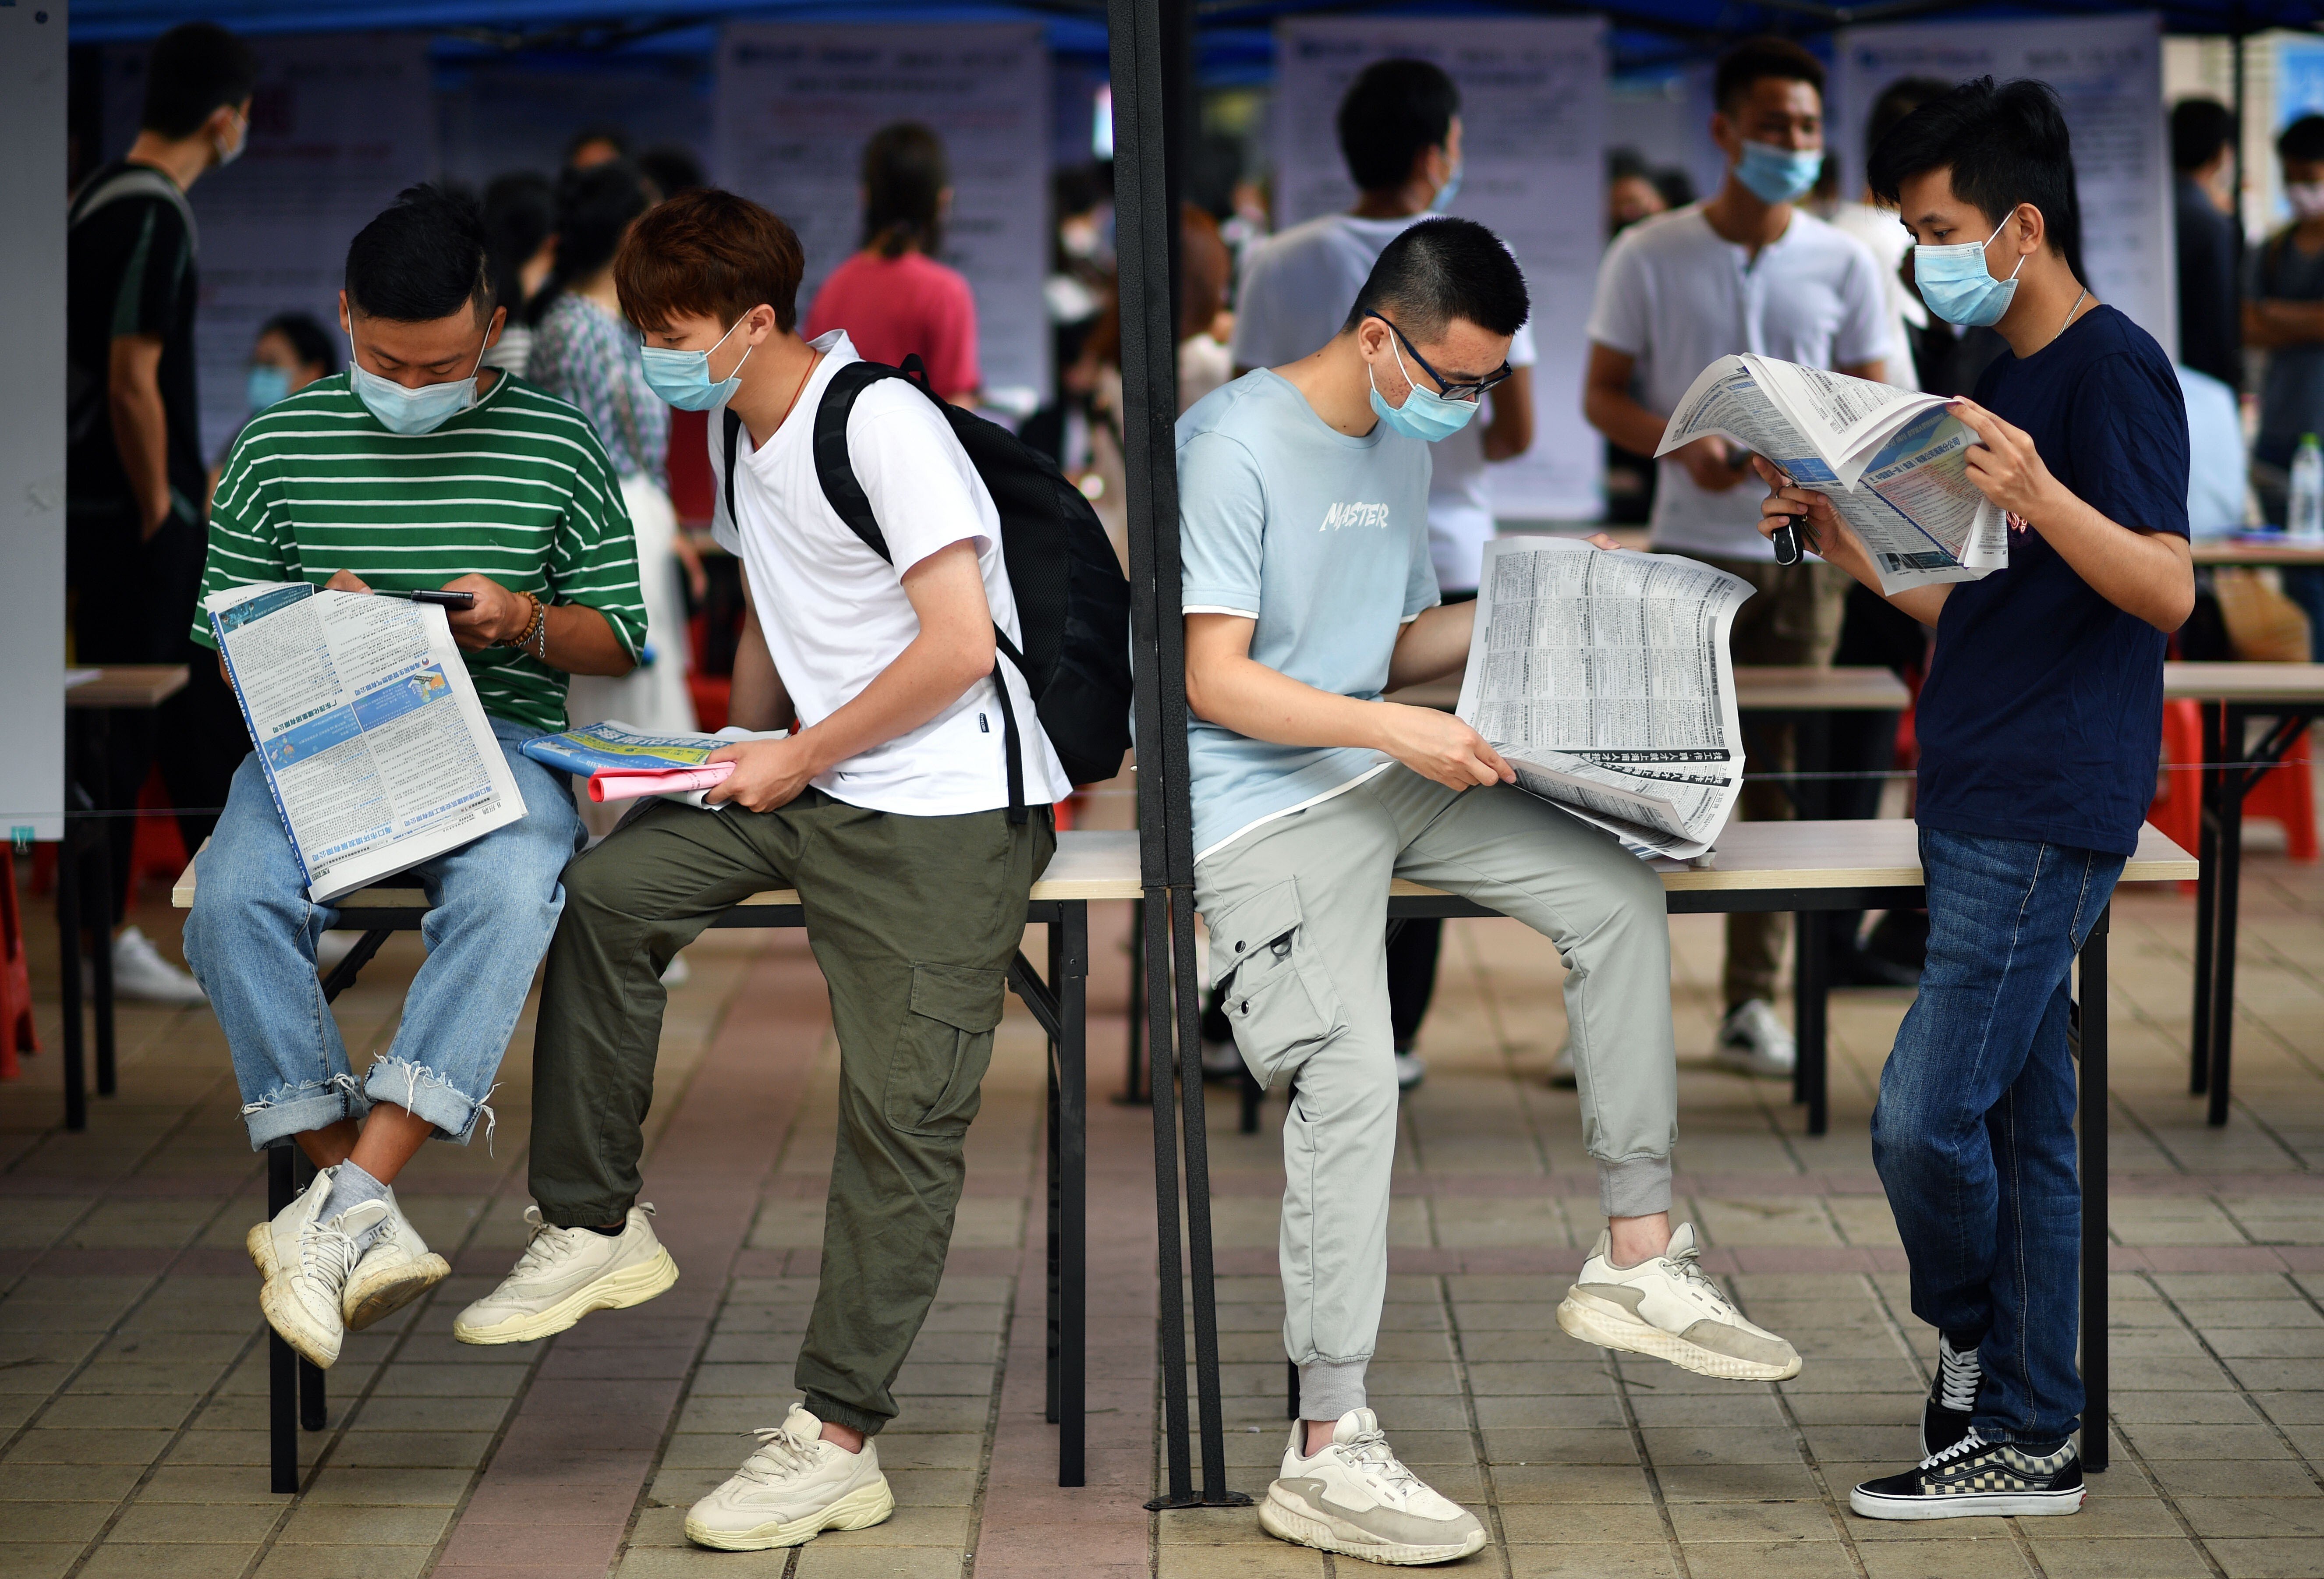 In October, the surveyed jobless rate was 5.3 per cent, down from 5.4 per cent in September, according to the National Bureau of Statistics (NBS). Photo: Xinhua